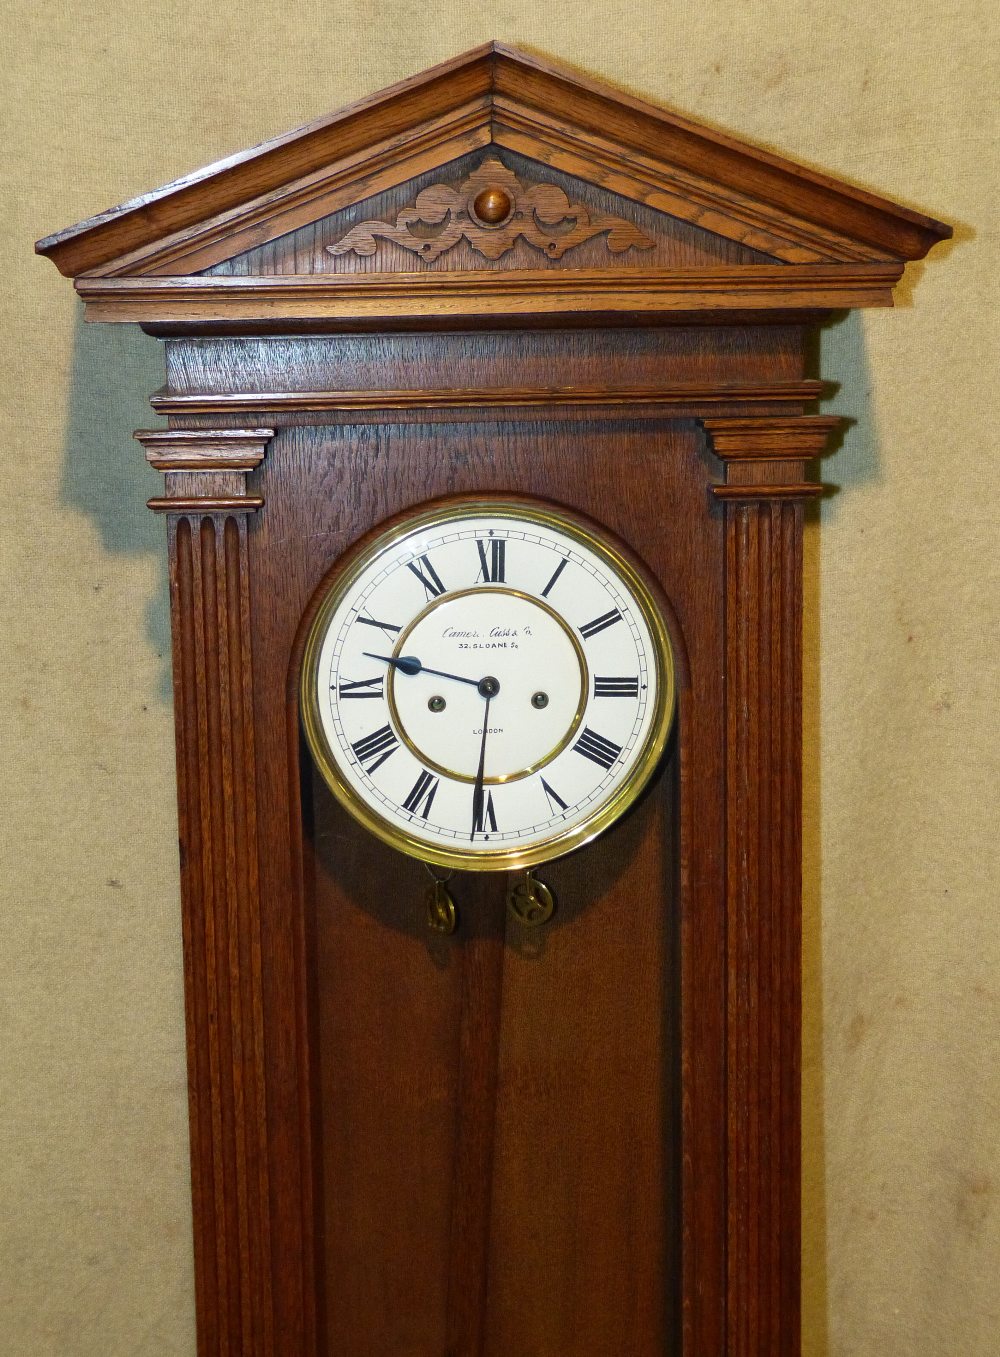 Camerer Cuss & Co London  Vienna  8 Day Striking Wall Clock having reeded column supports oval